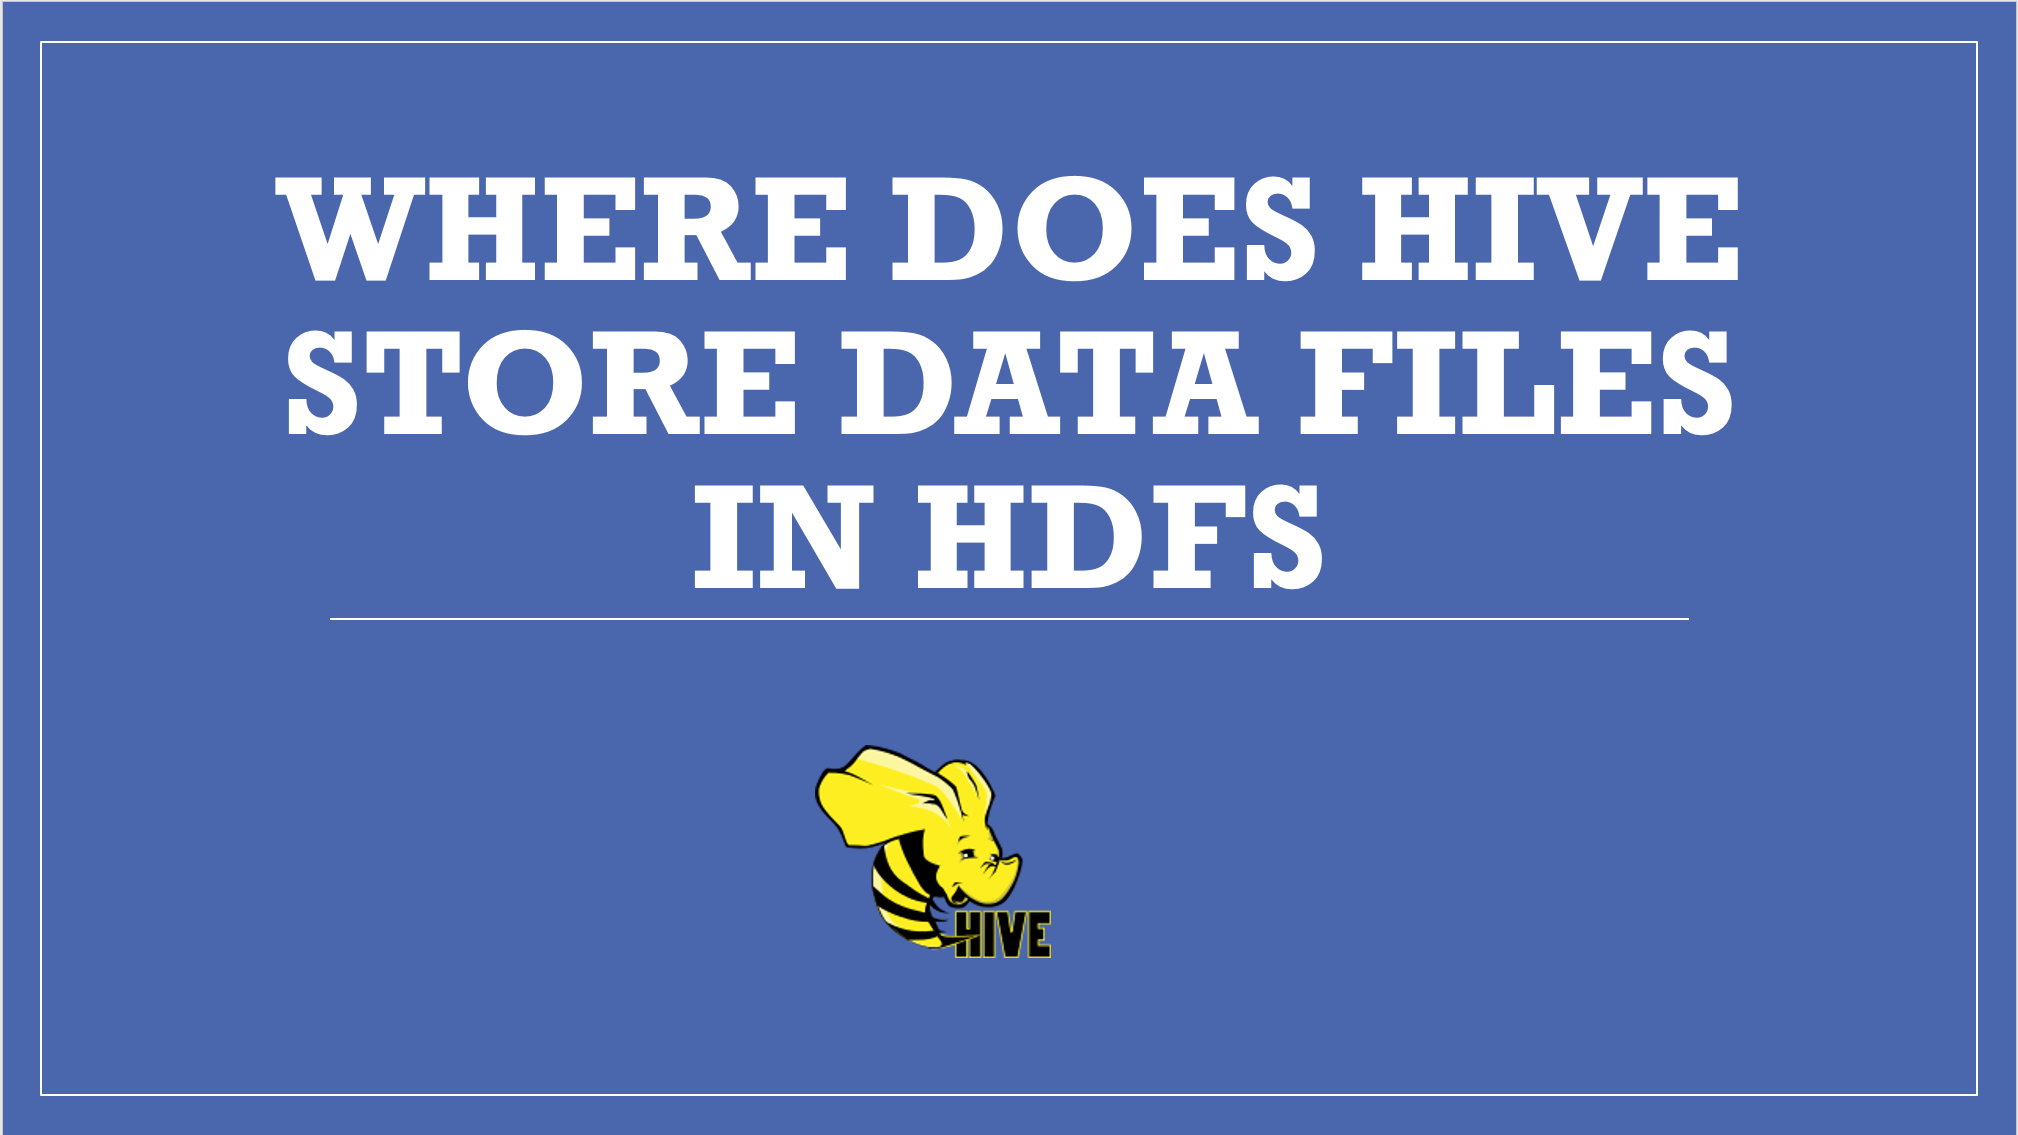 You are currently viewing Where Does Hive Stores Data Files in HDFS?